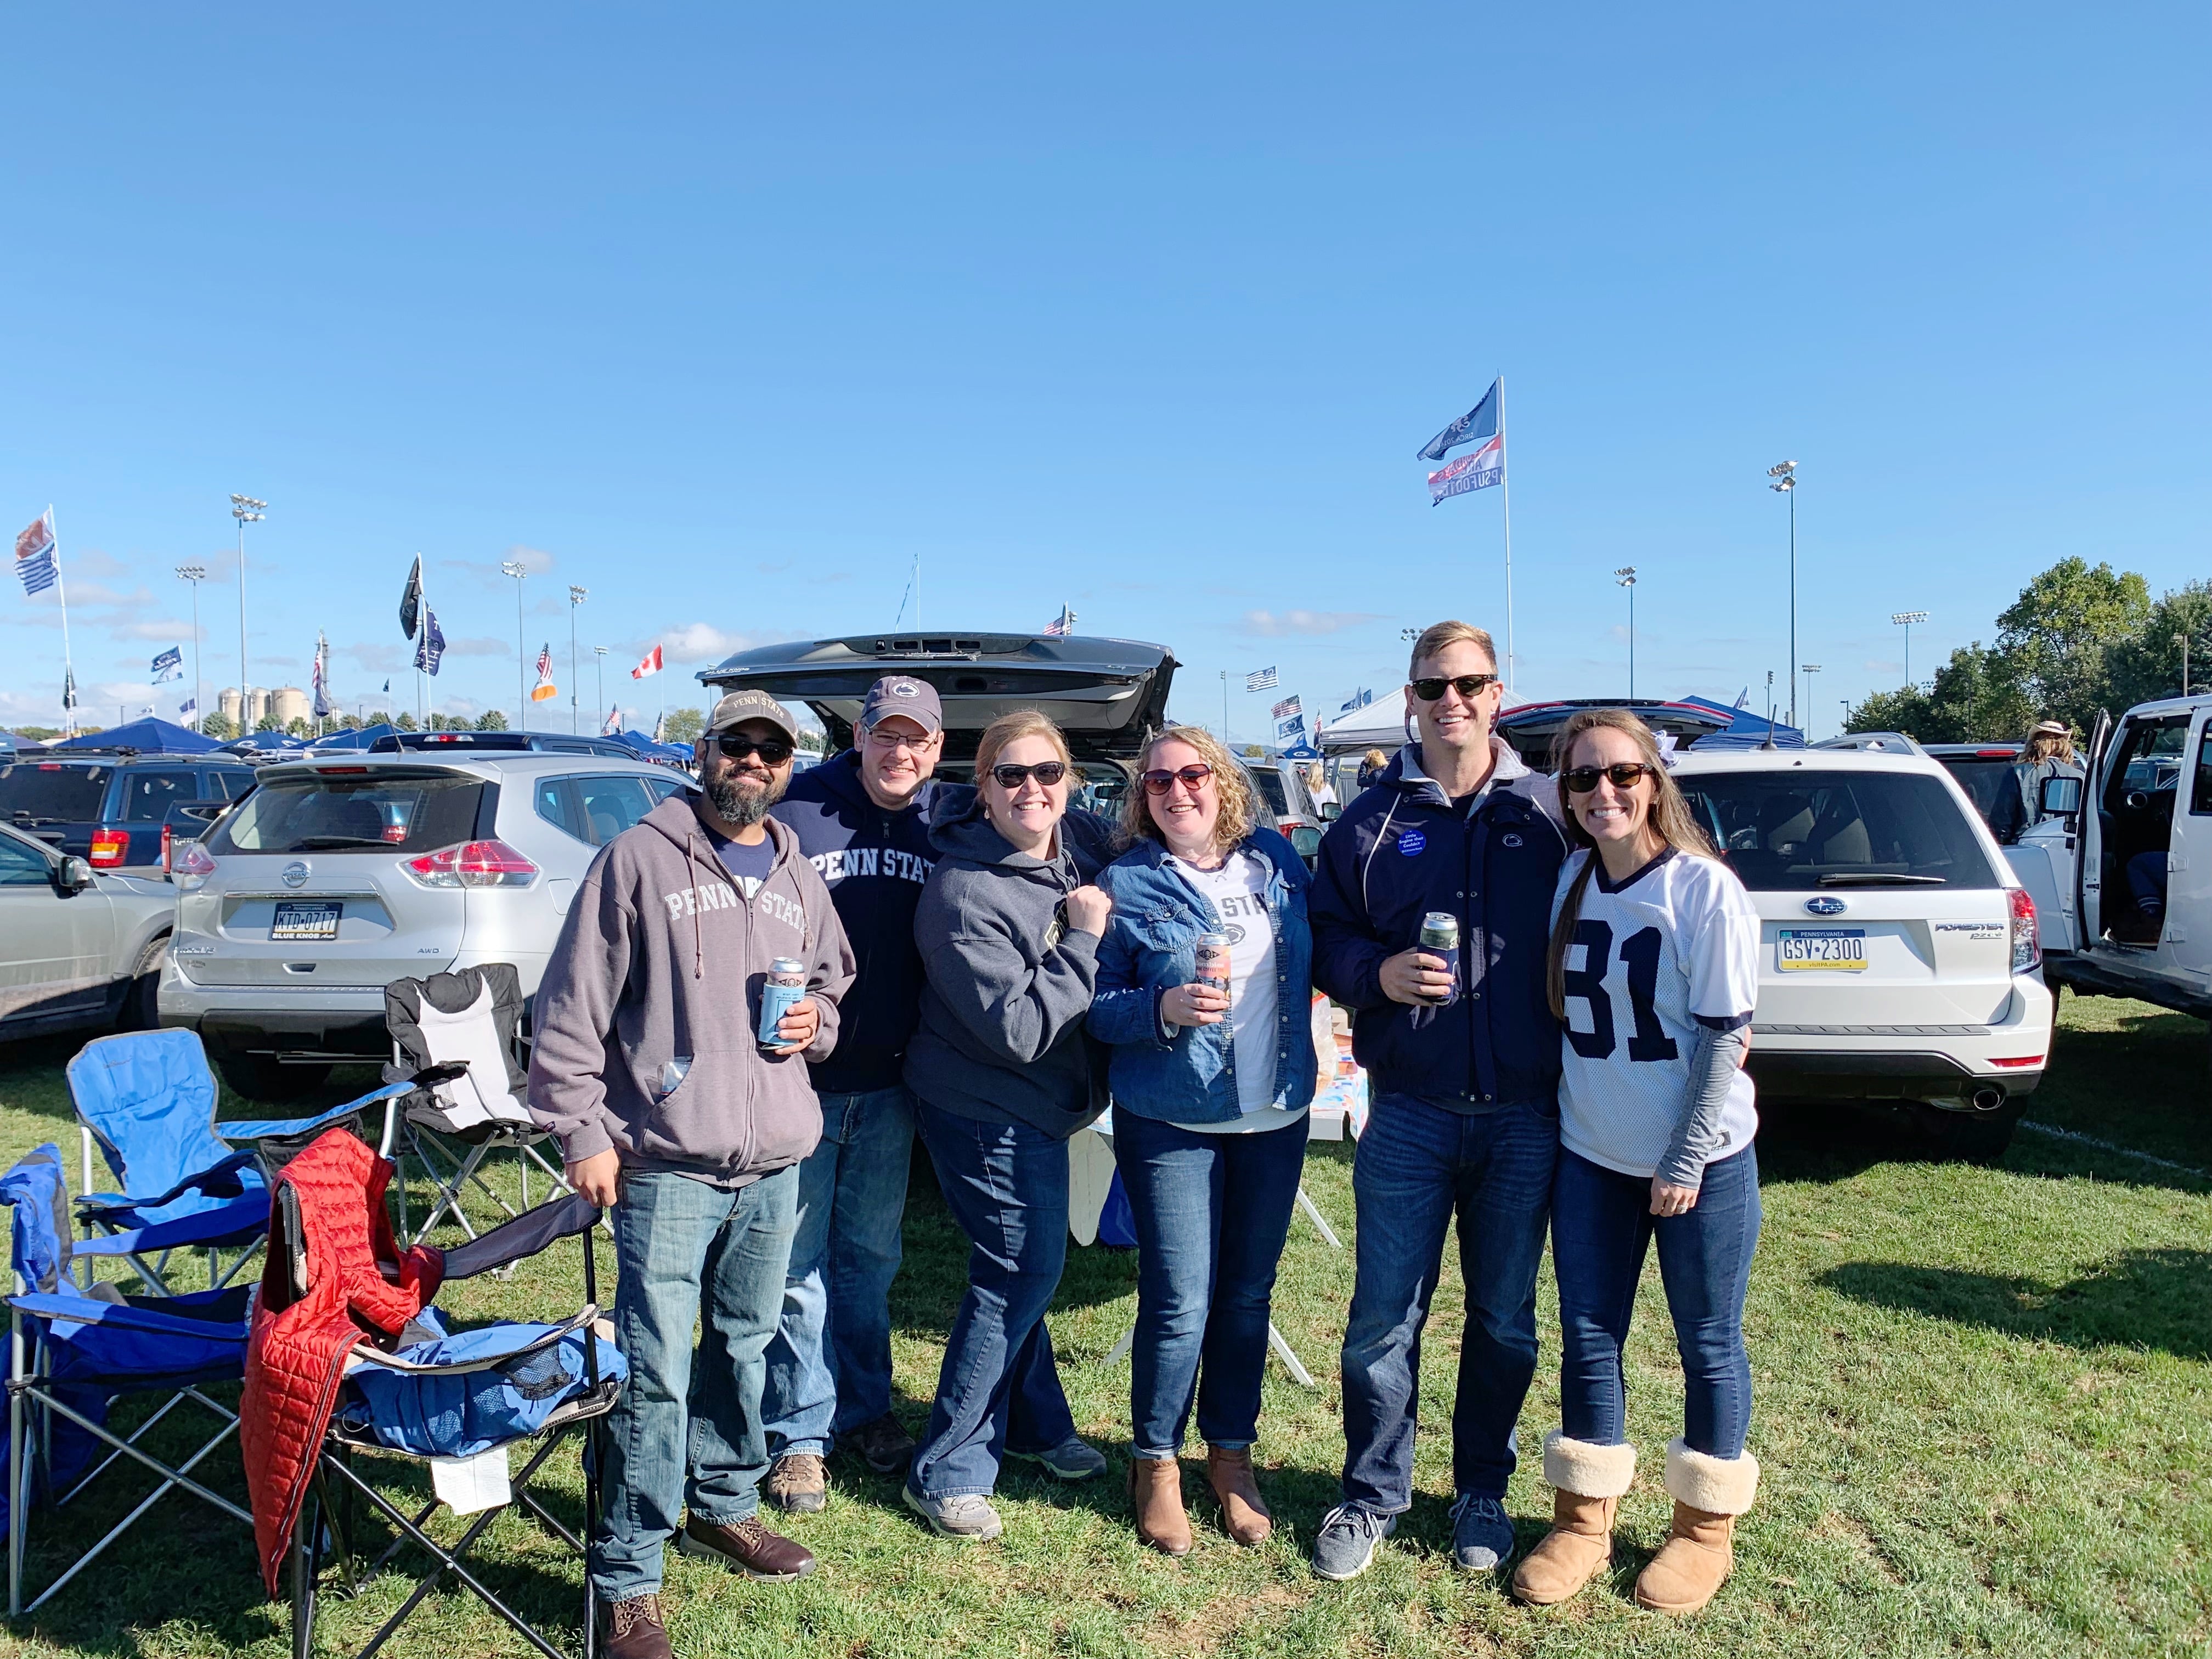 Penn State Homecoming 2019 - A trip to Penn State in State College, Pennsylvania for the 2019 Homecoming football game! | Penn State Football - State College, Pennsylvania - Beaver Stadium - Tailgating - PSU - Happy Valley